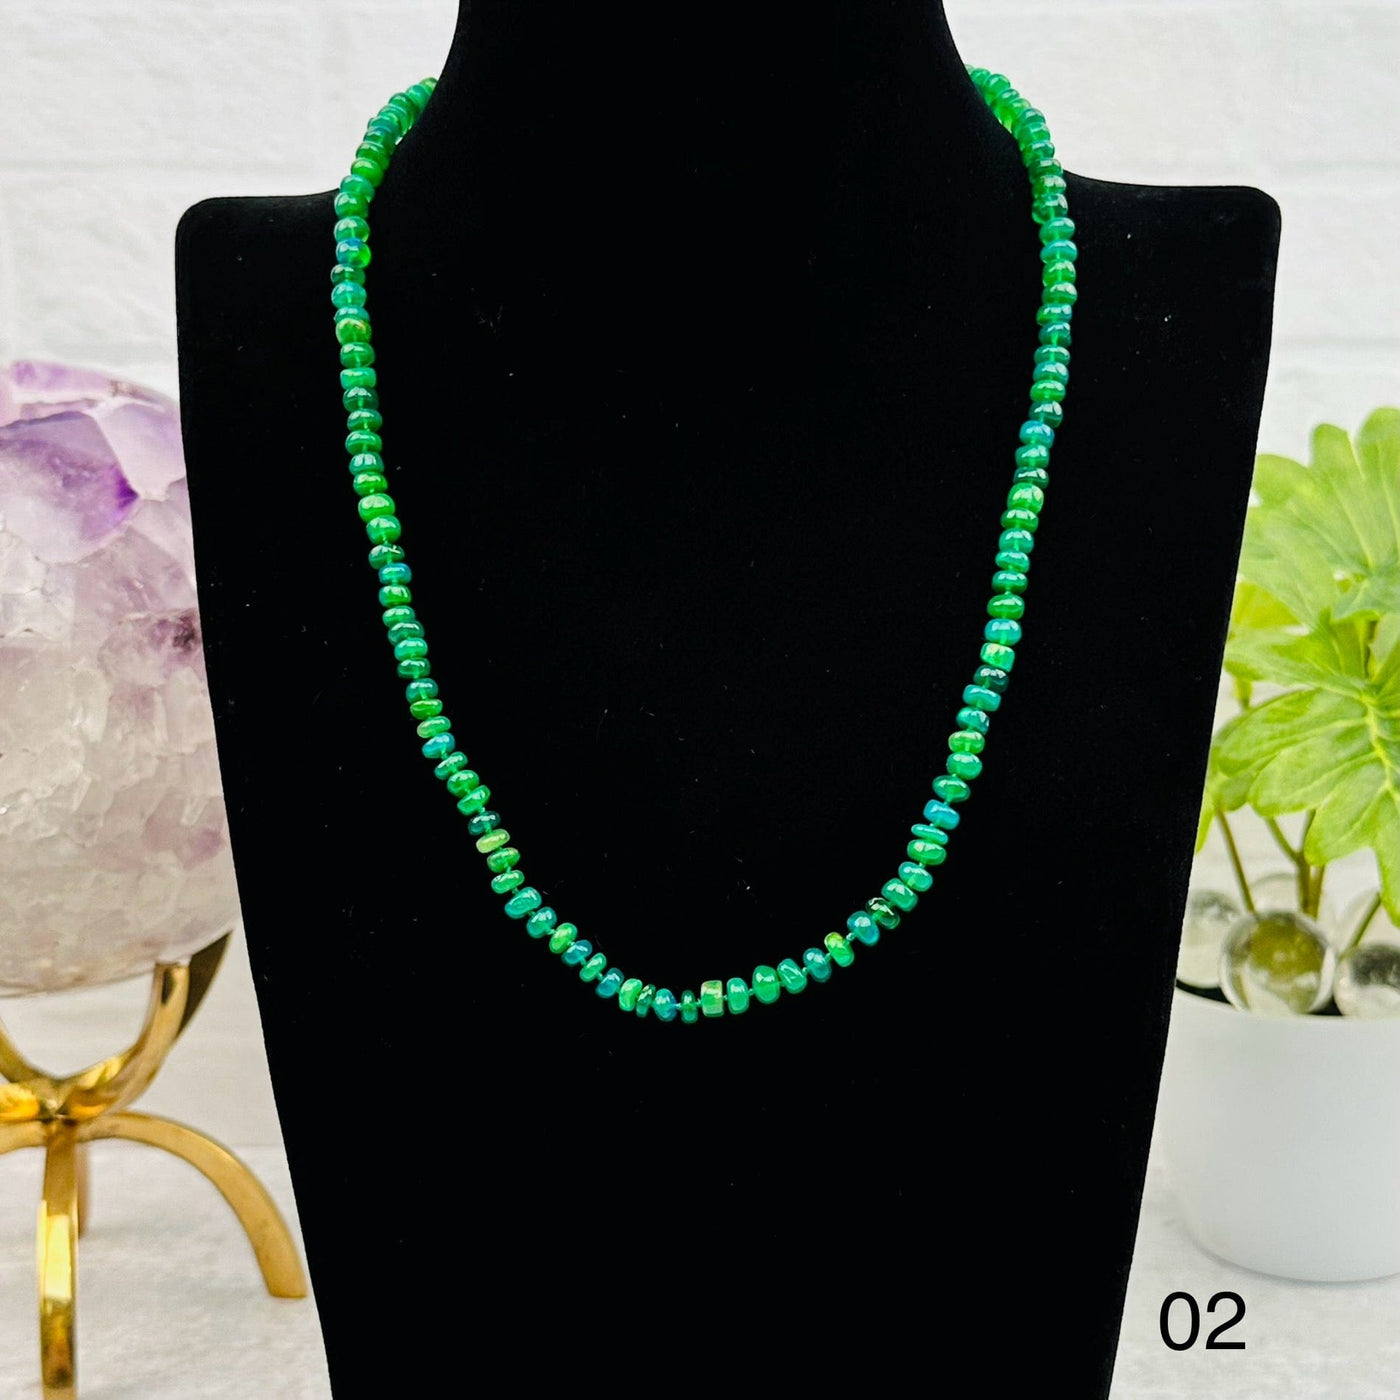 option 02 is for this green opal necklace 